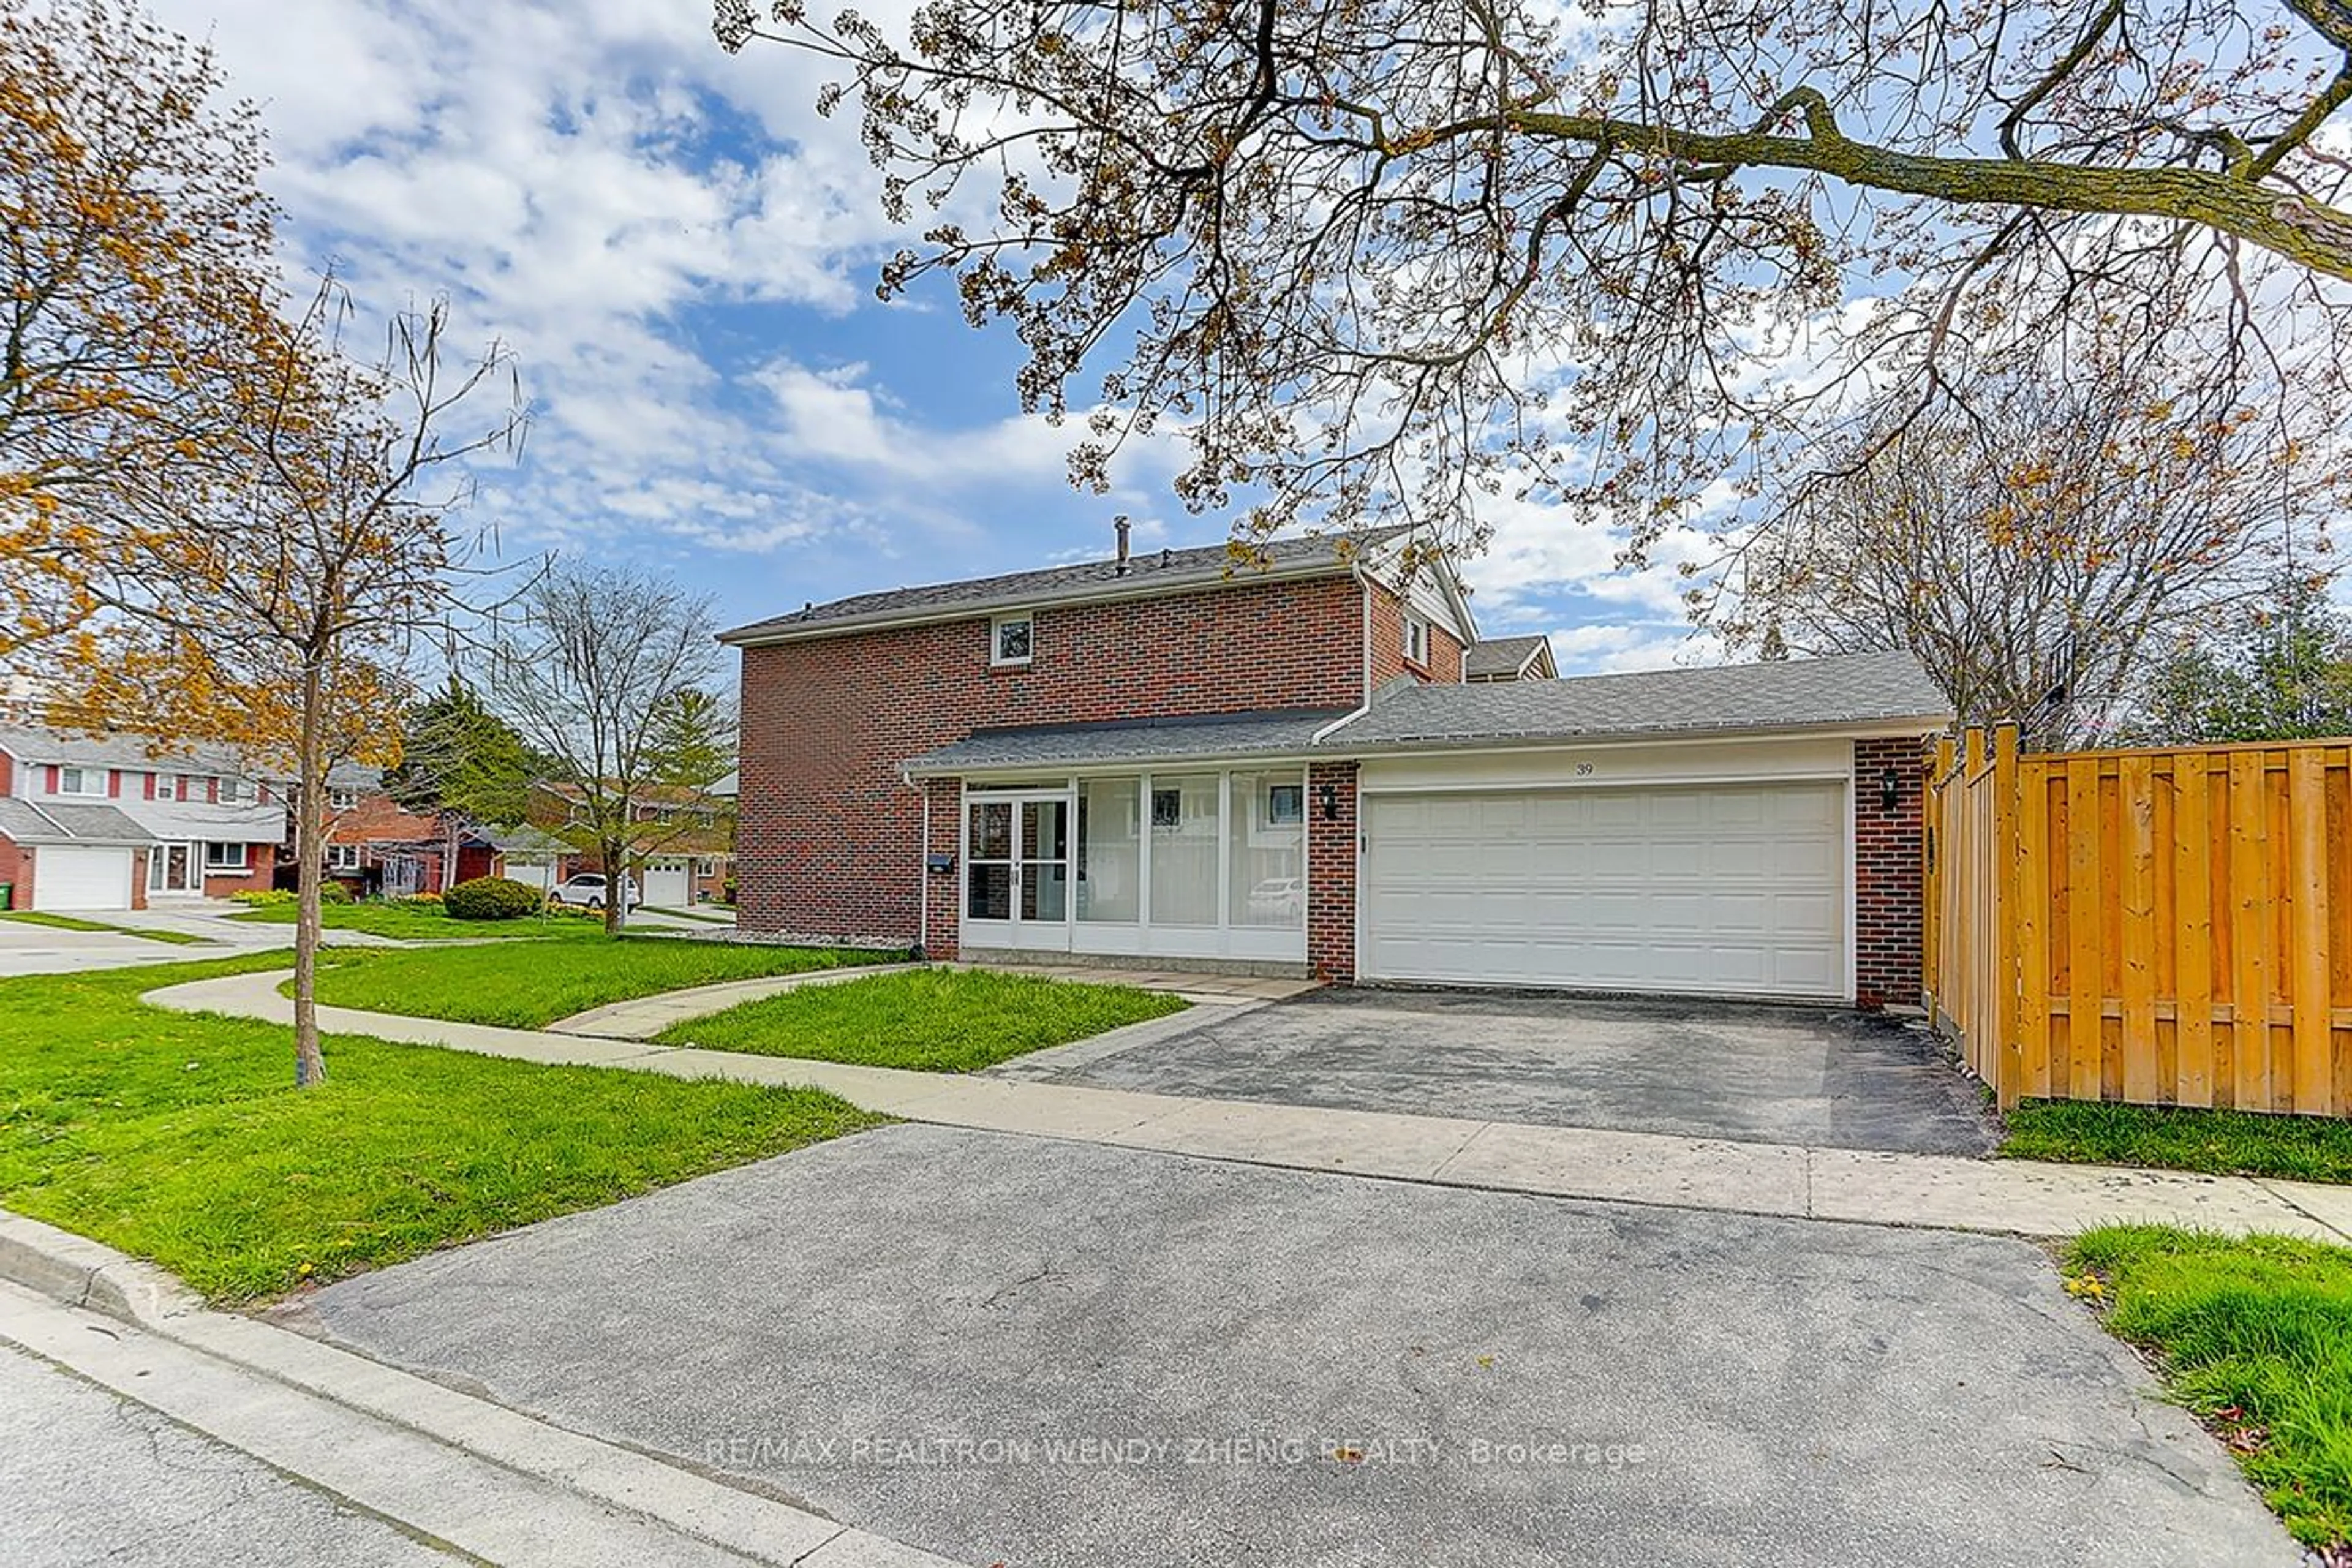 Home with brick exterior material for 39 Longford Cres, Toronto Ontario M1W 1P3